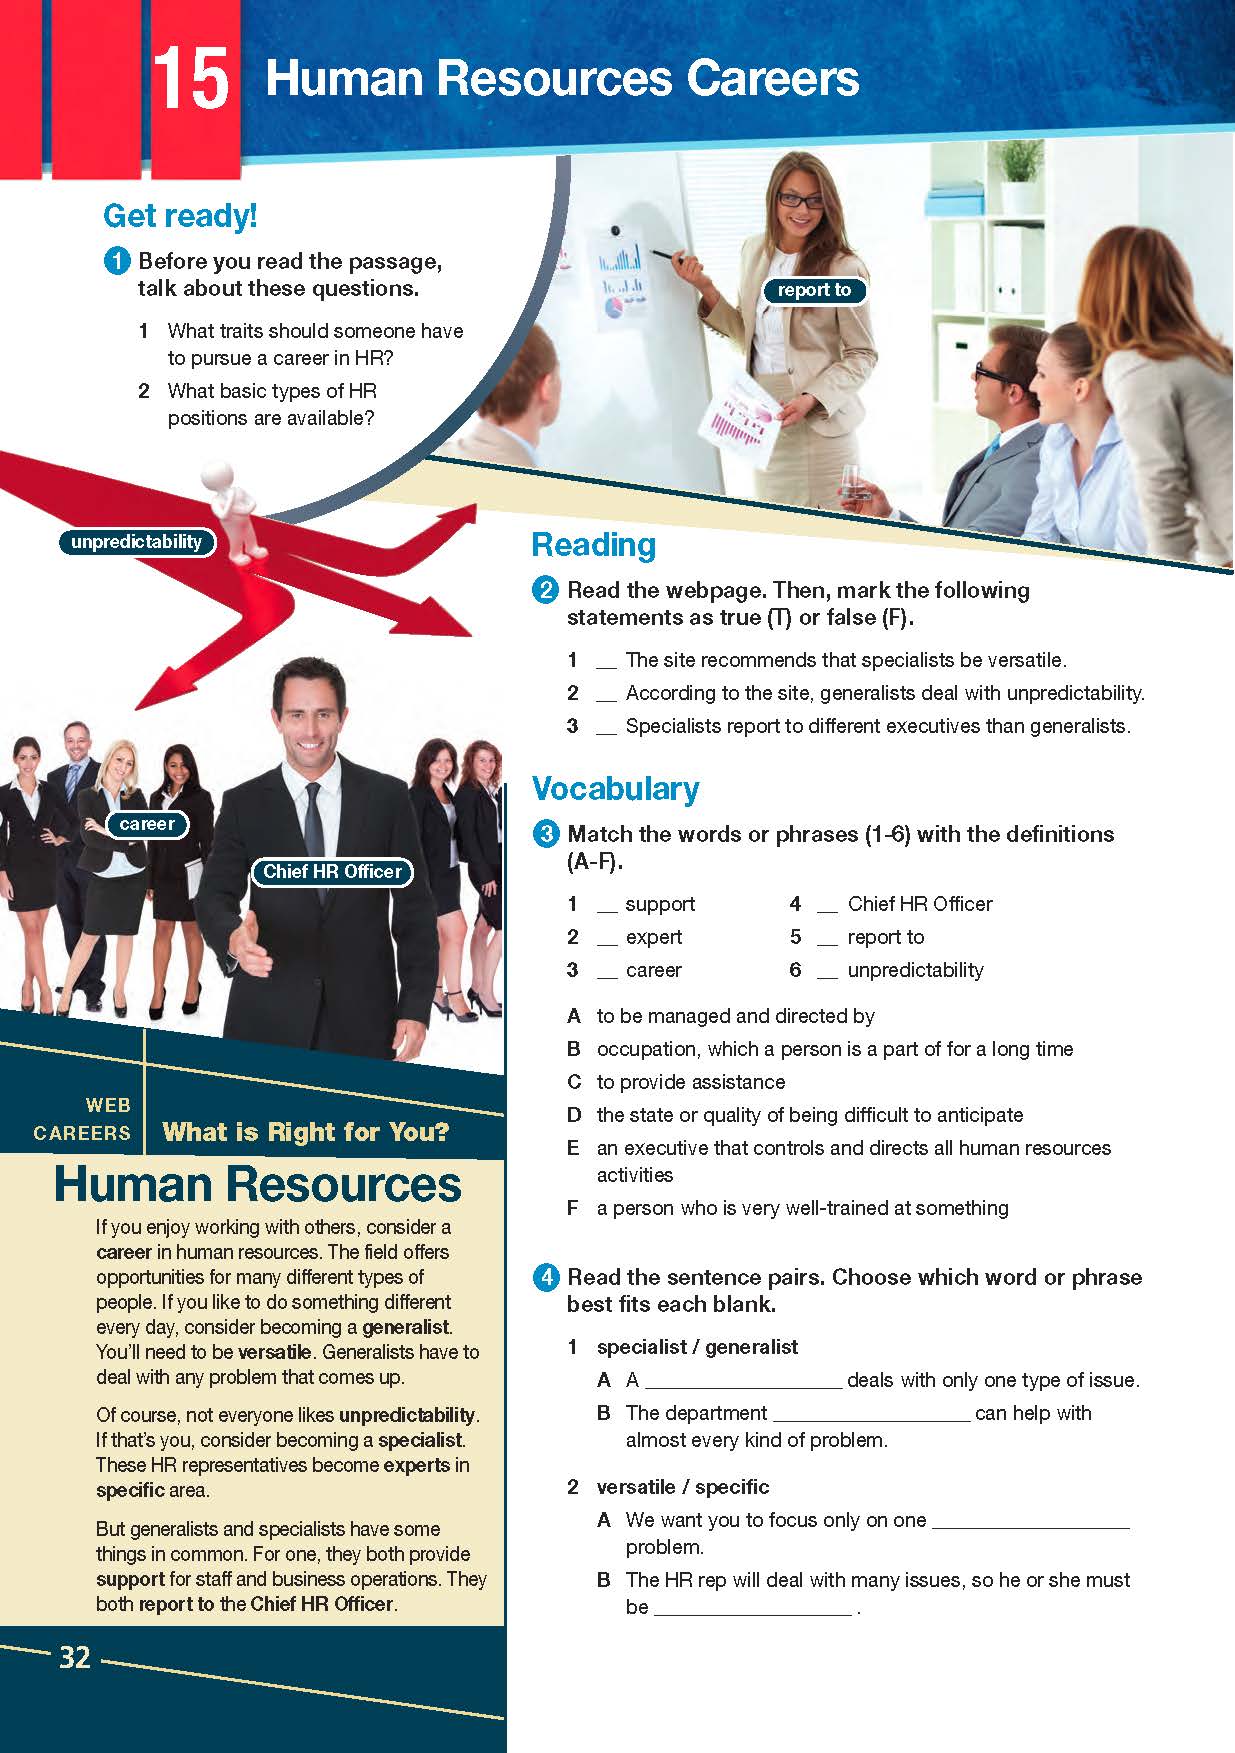 ESP English for Specific Purposes - Career Paths: Human Resources - Sample Page 3